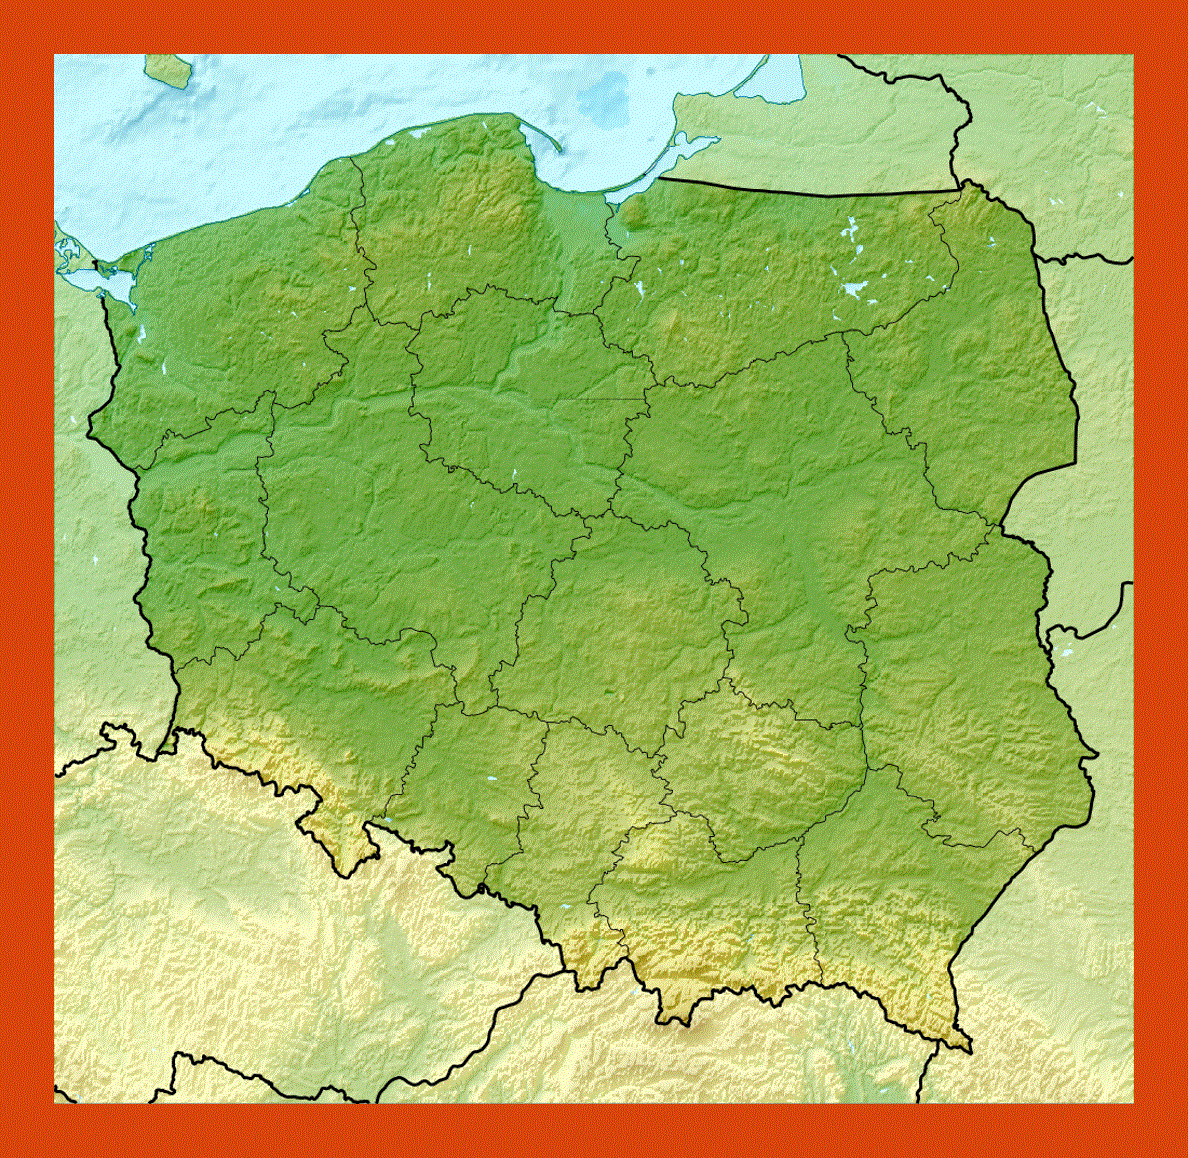 Relief map of Poland